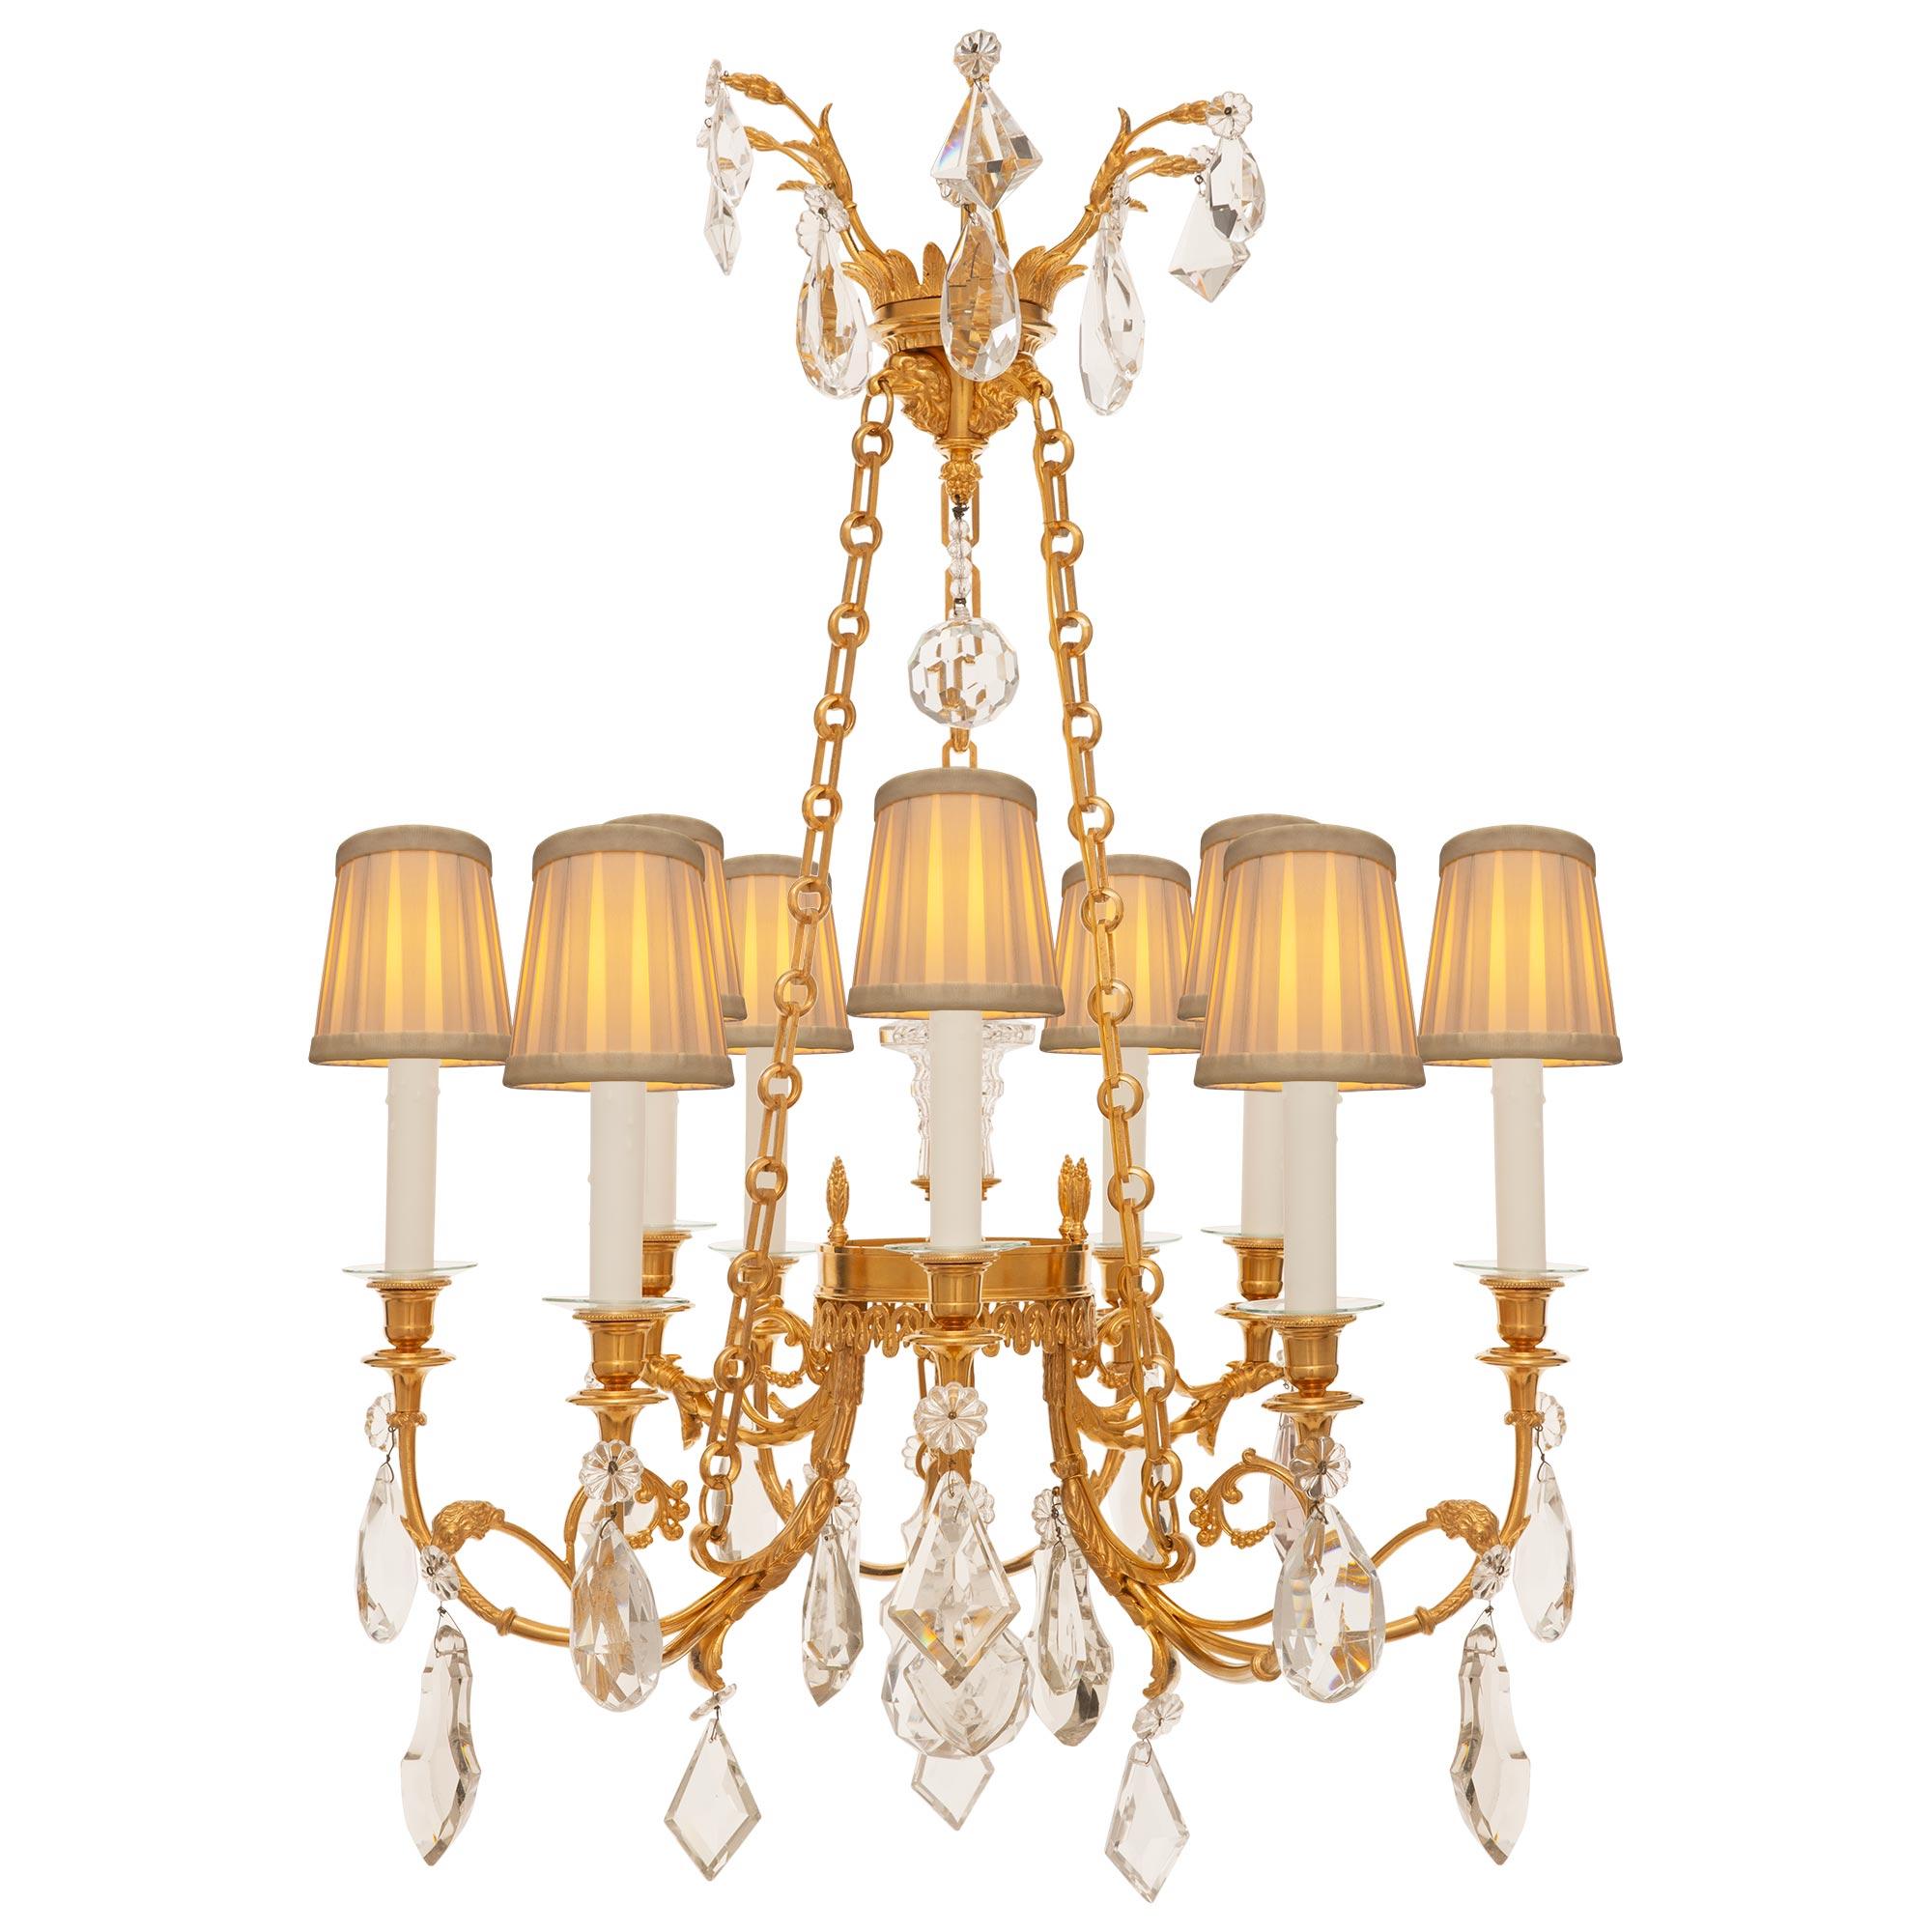 French 19th Century Belle Époque Period Ormolu And Baccarat Crystal Chandelier For Sale